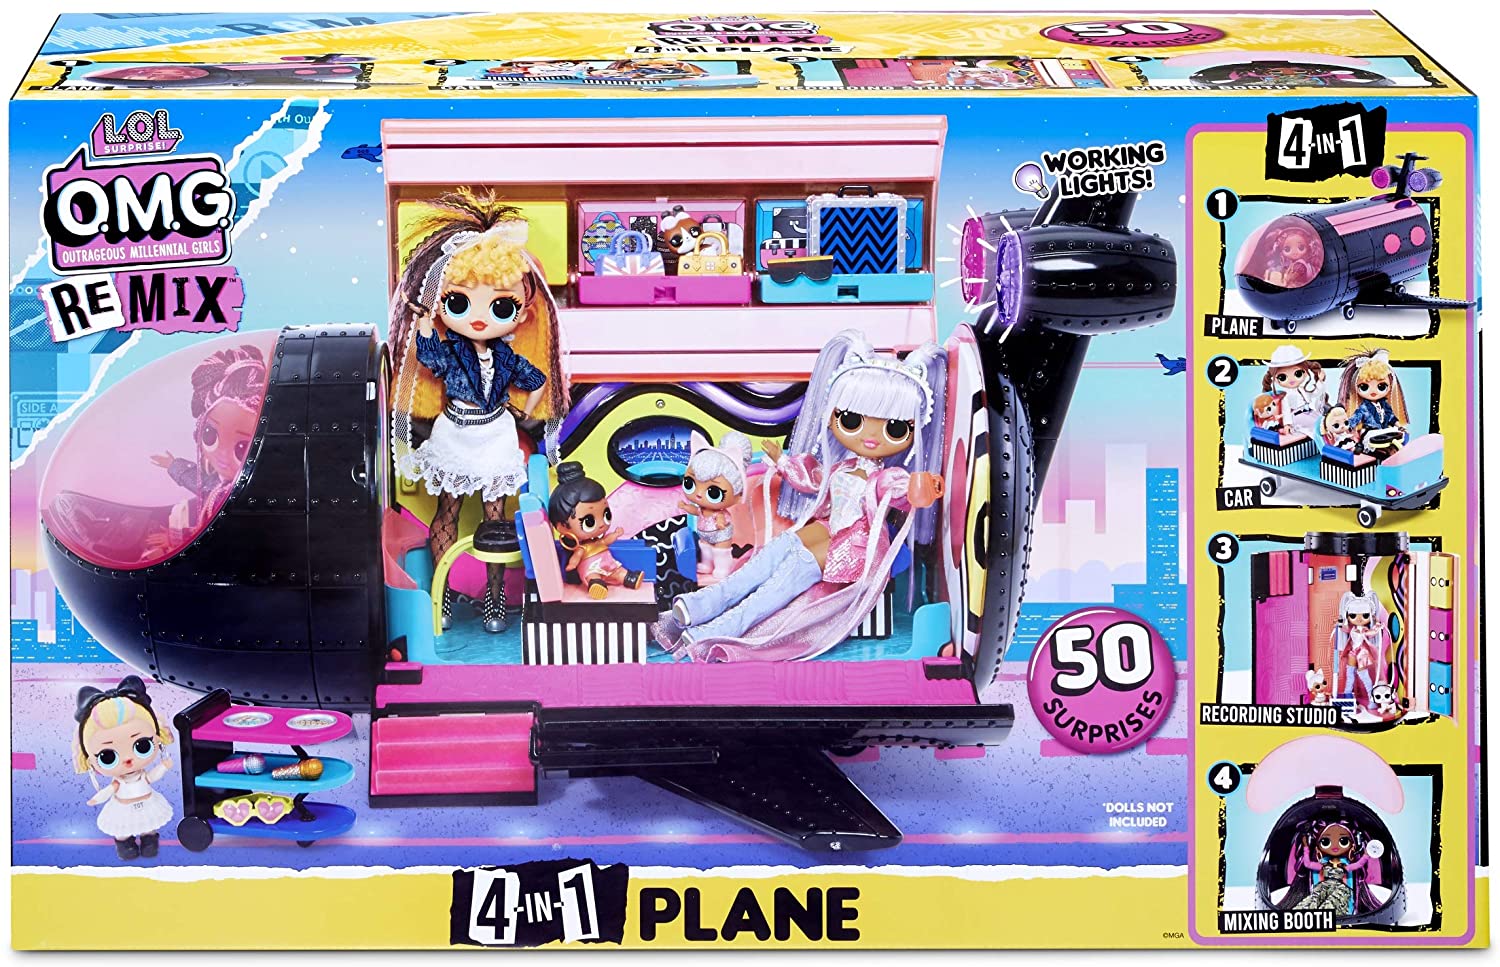 LOL Surprise OMG Remix Party Plane - 4 in 1 - YouLoveIt.com